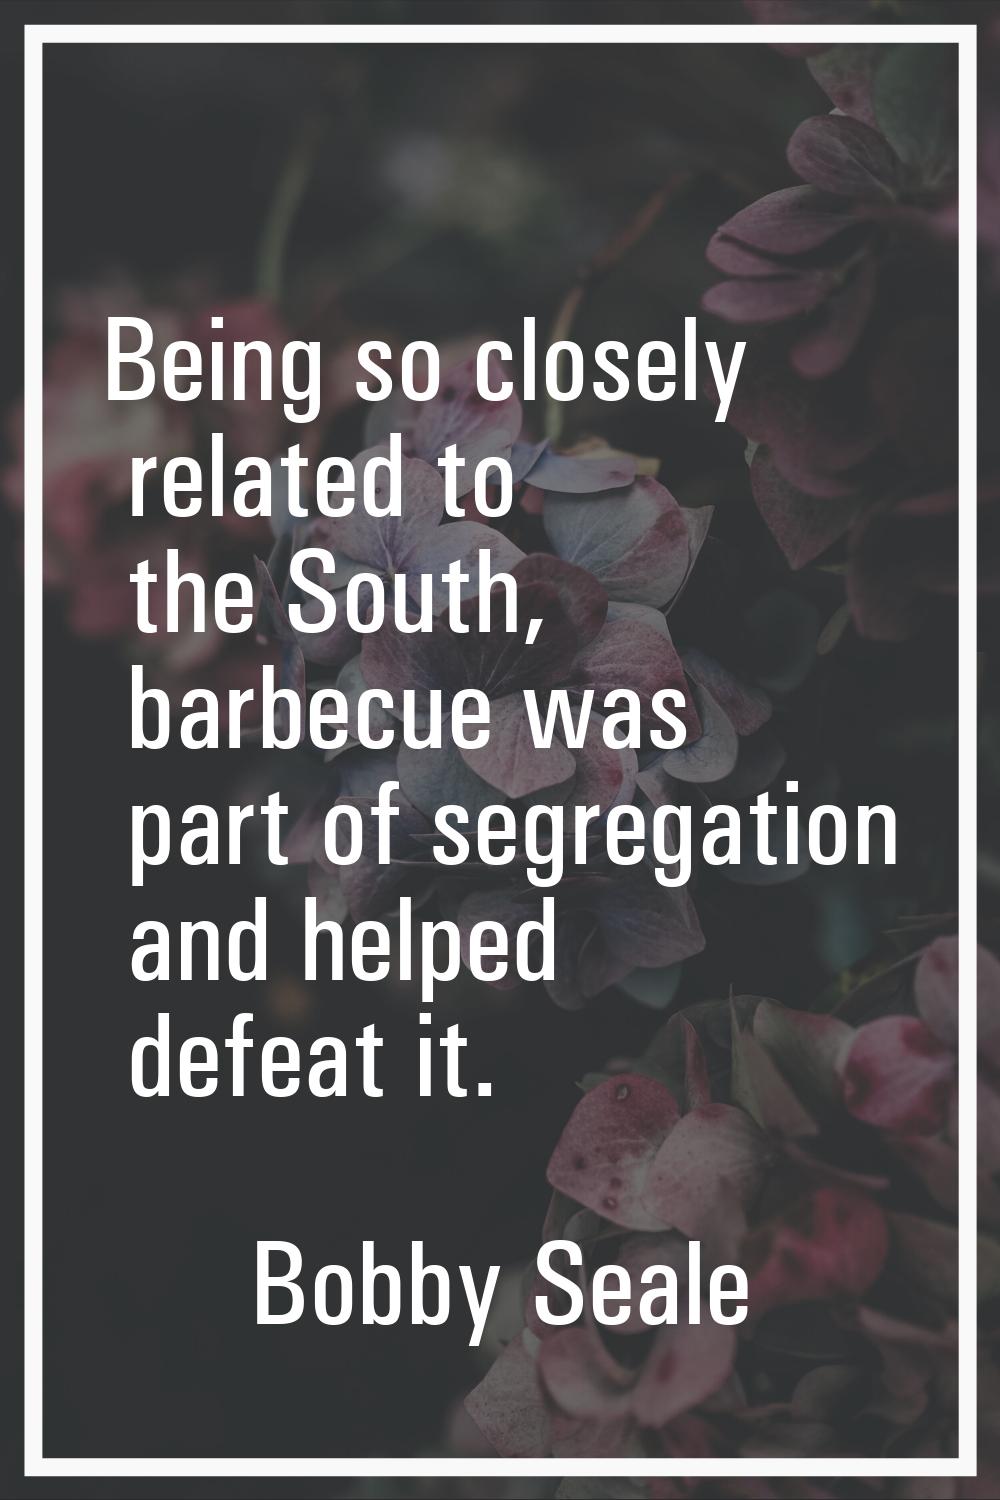 Being so closely related to the South, barbecue was part of segregation and helped defeat it.